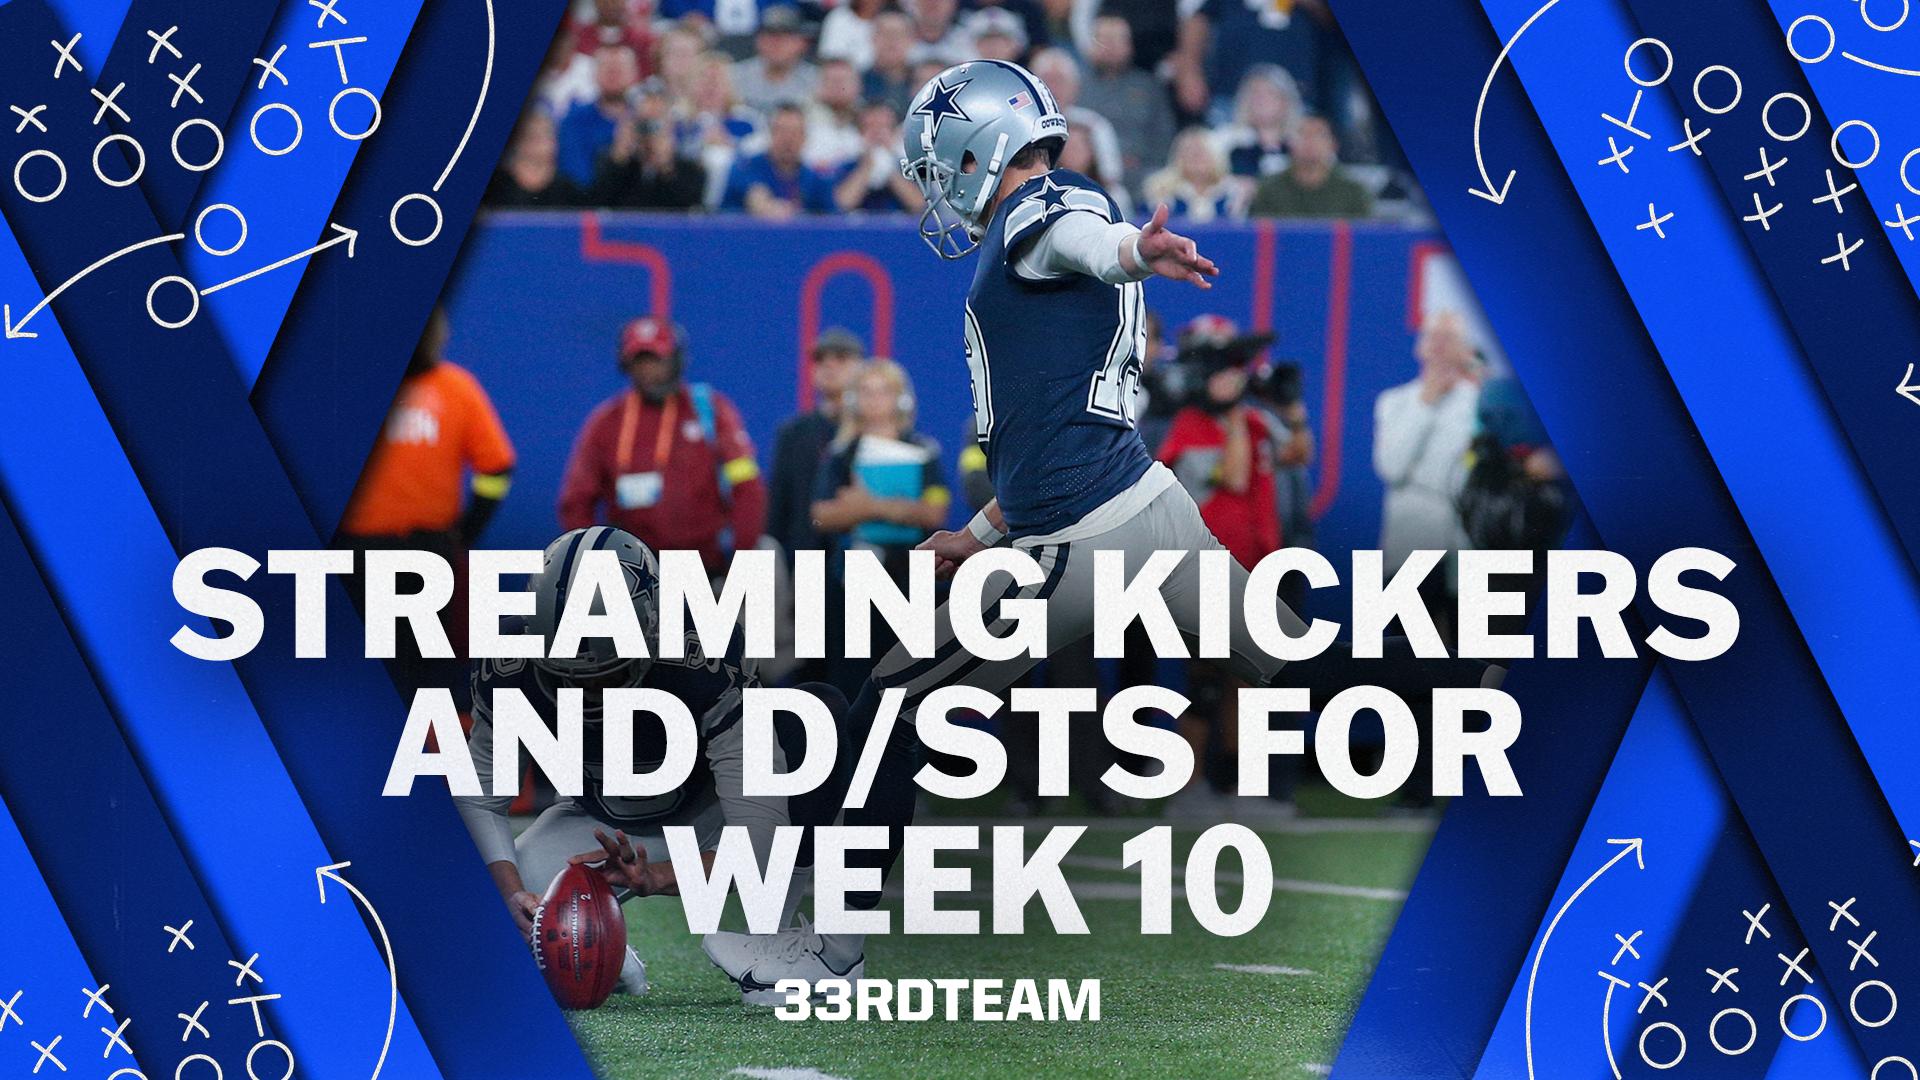 Top Streaming Fantasy Kickers and D/STs for Week 10